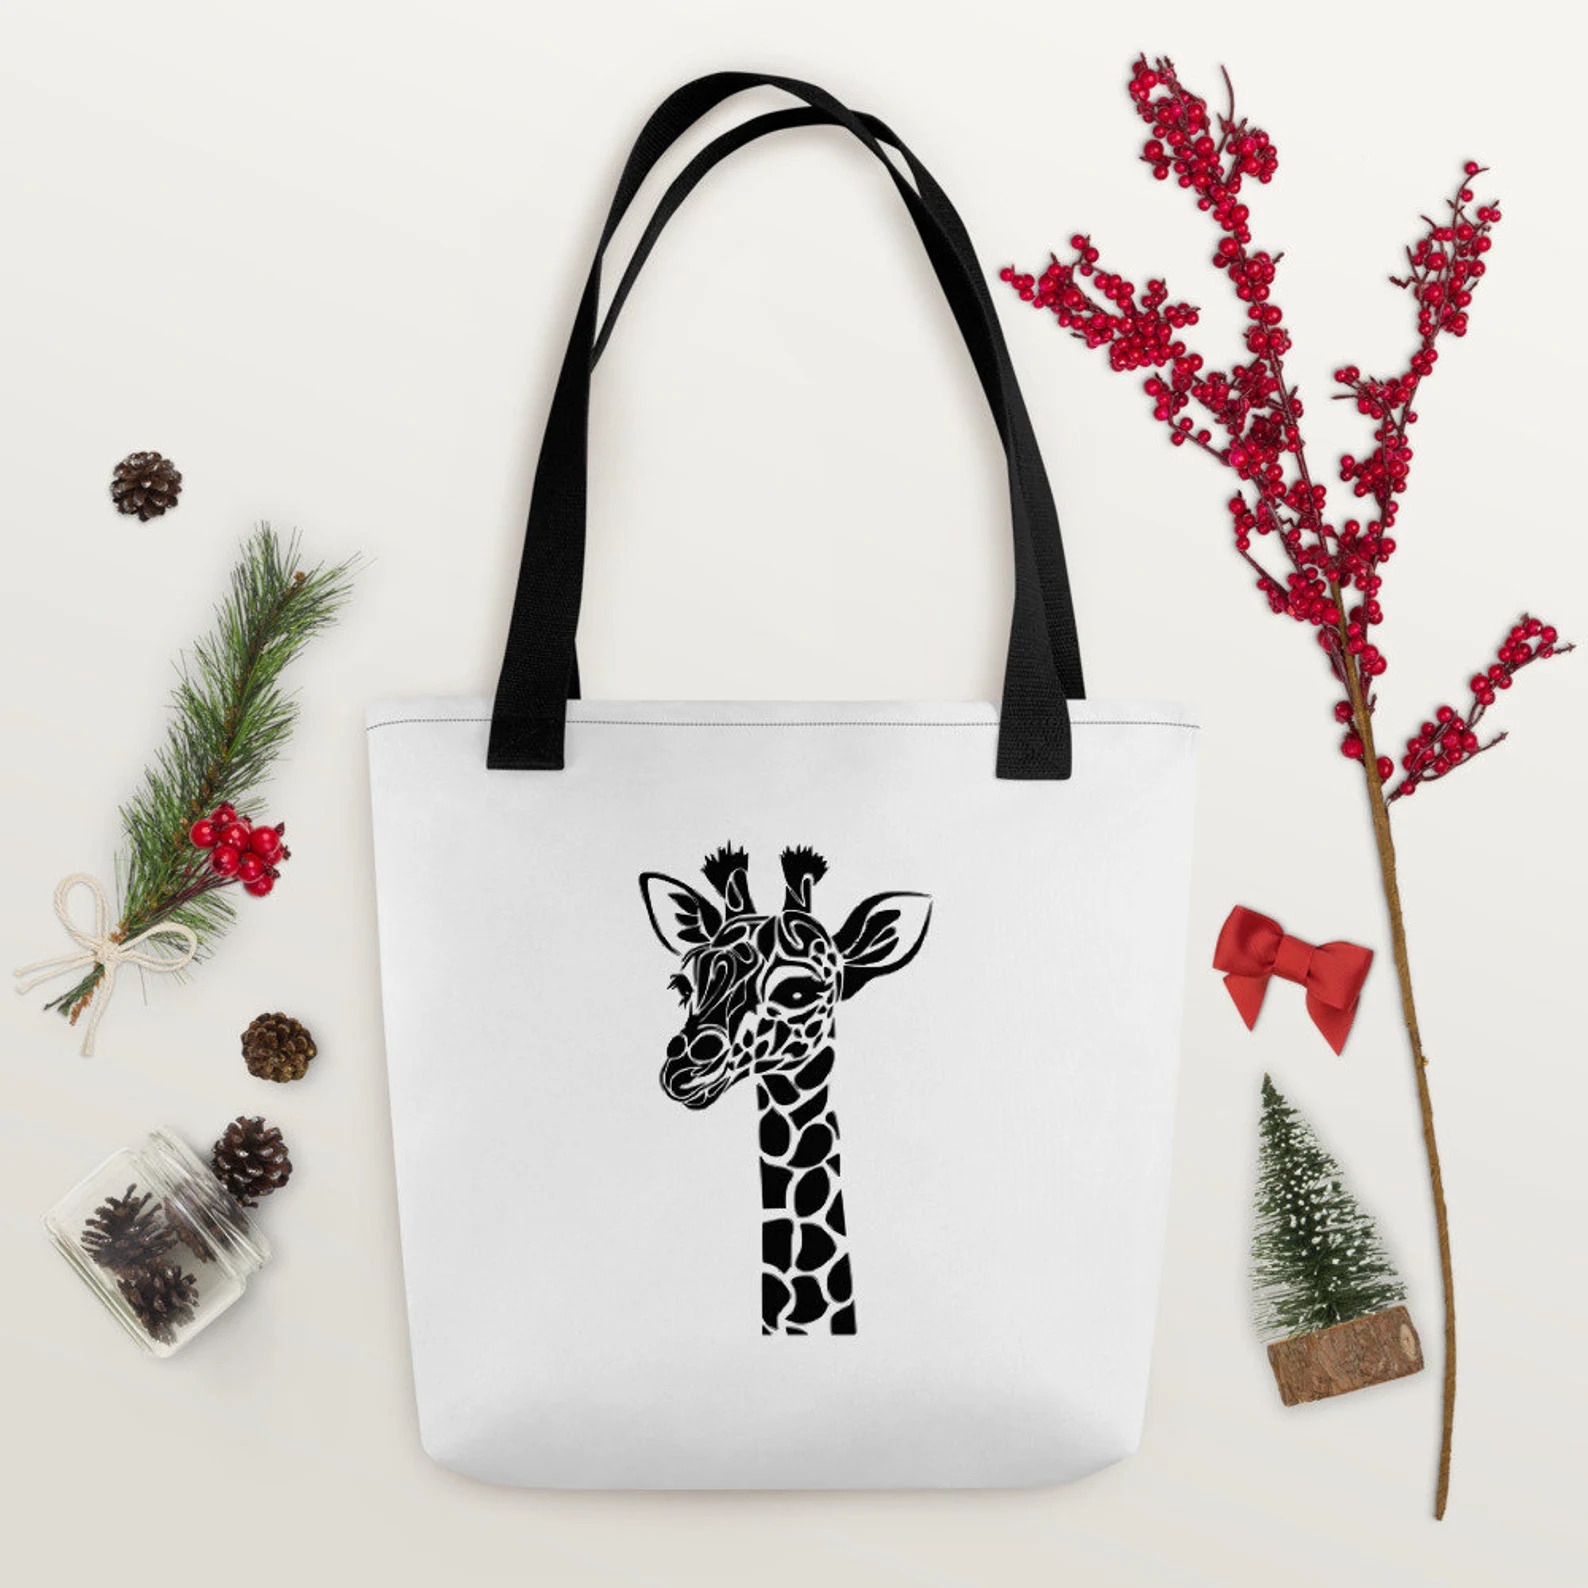 Tote bag with a giraffe design on it.